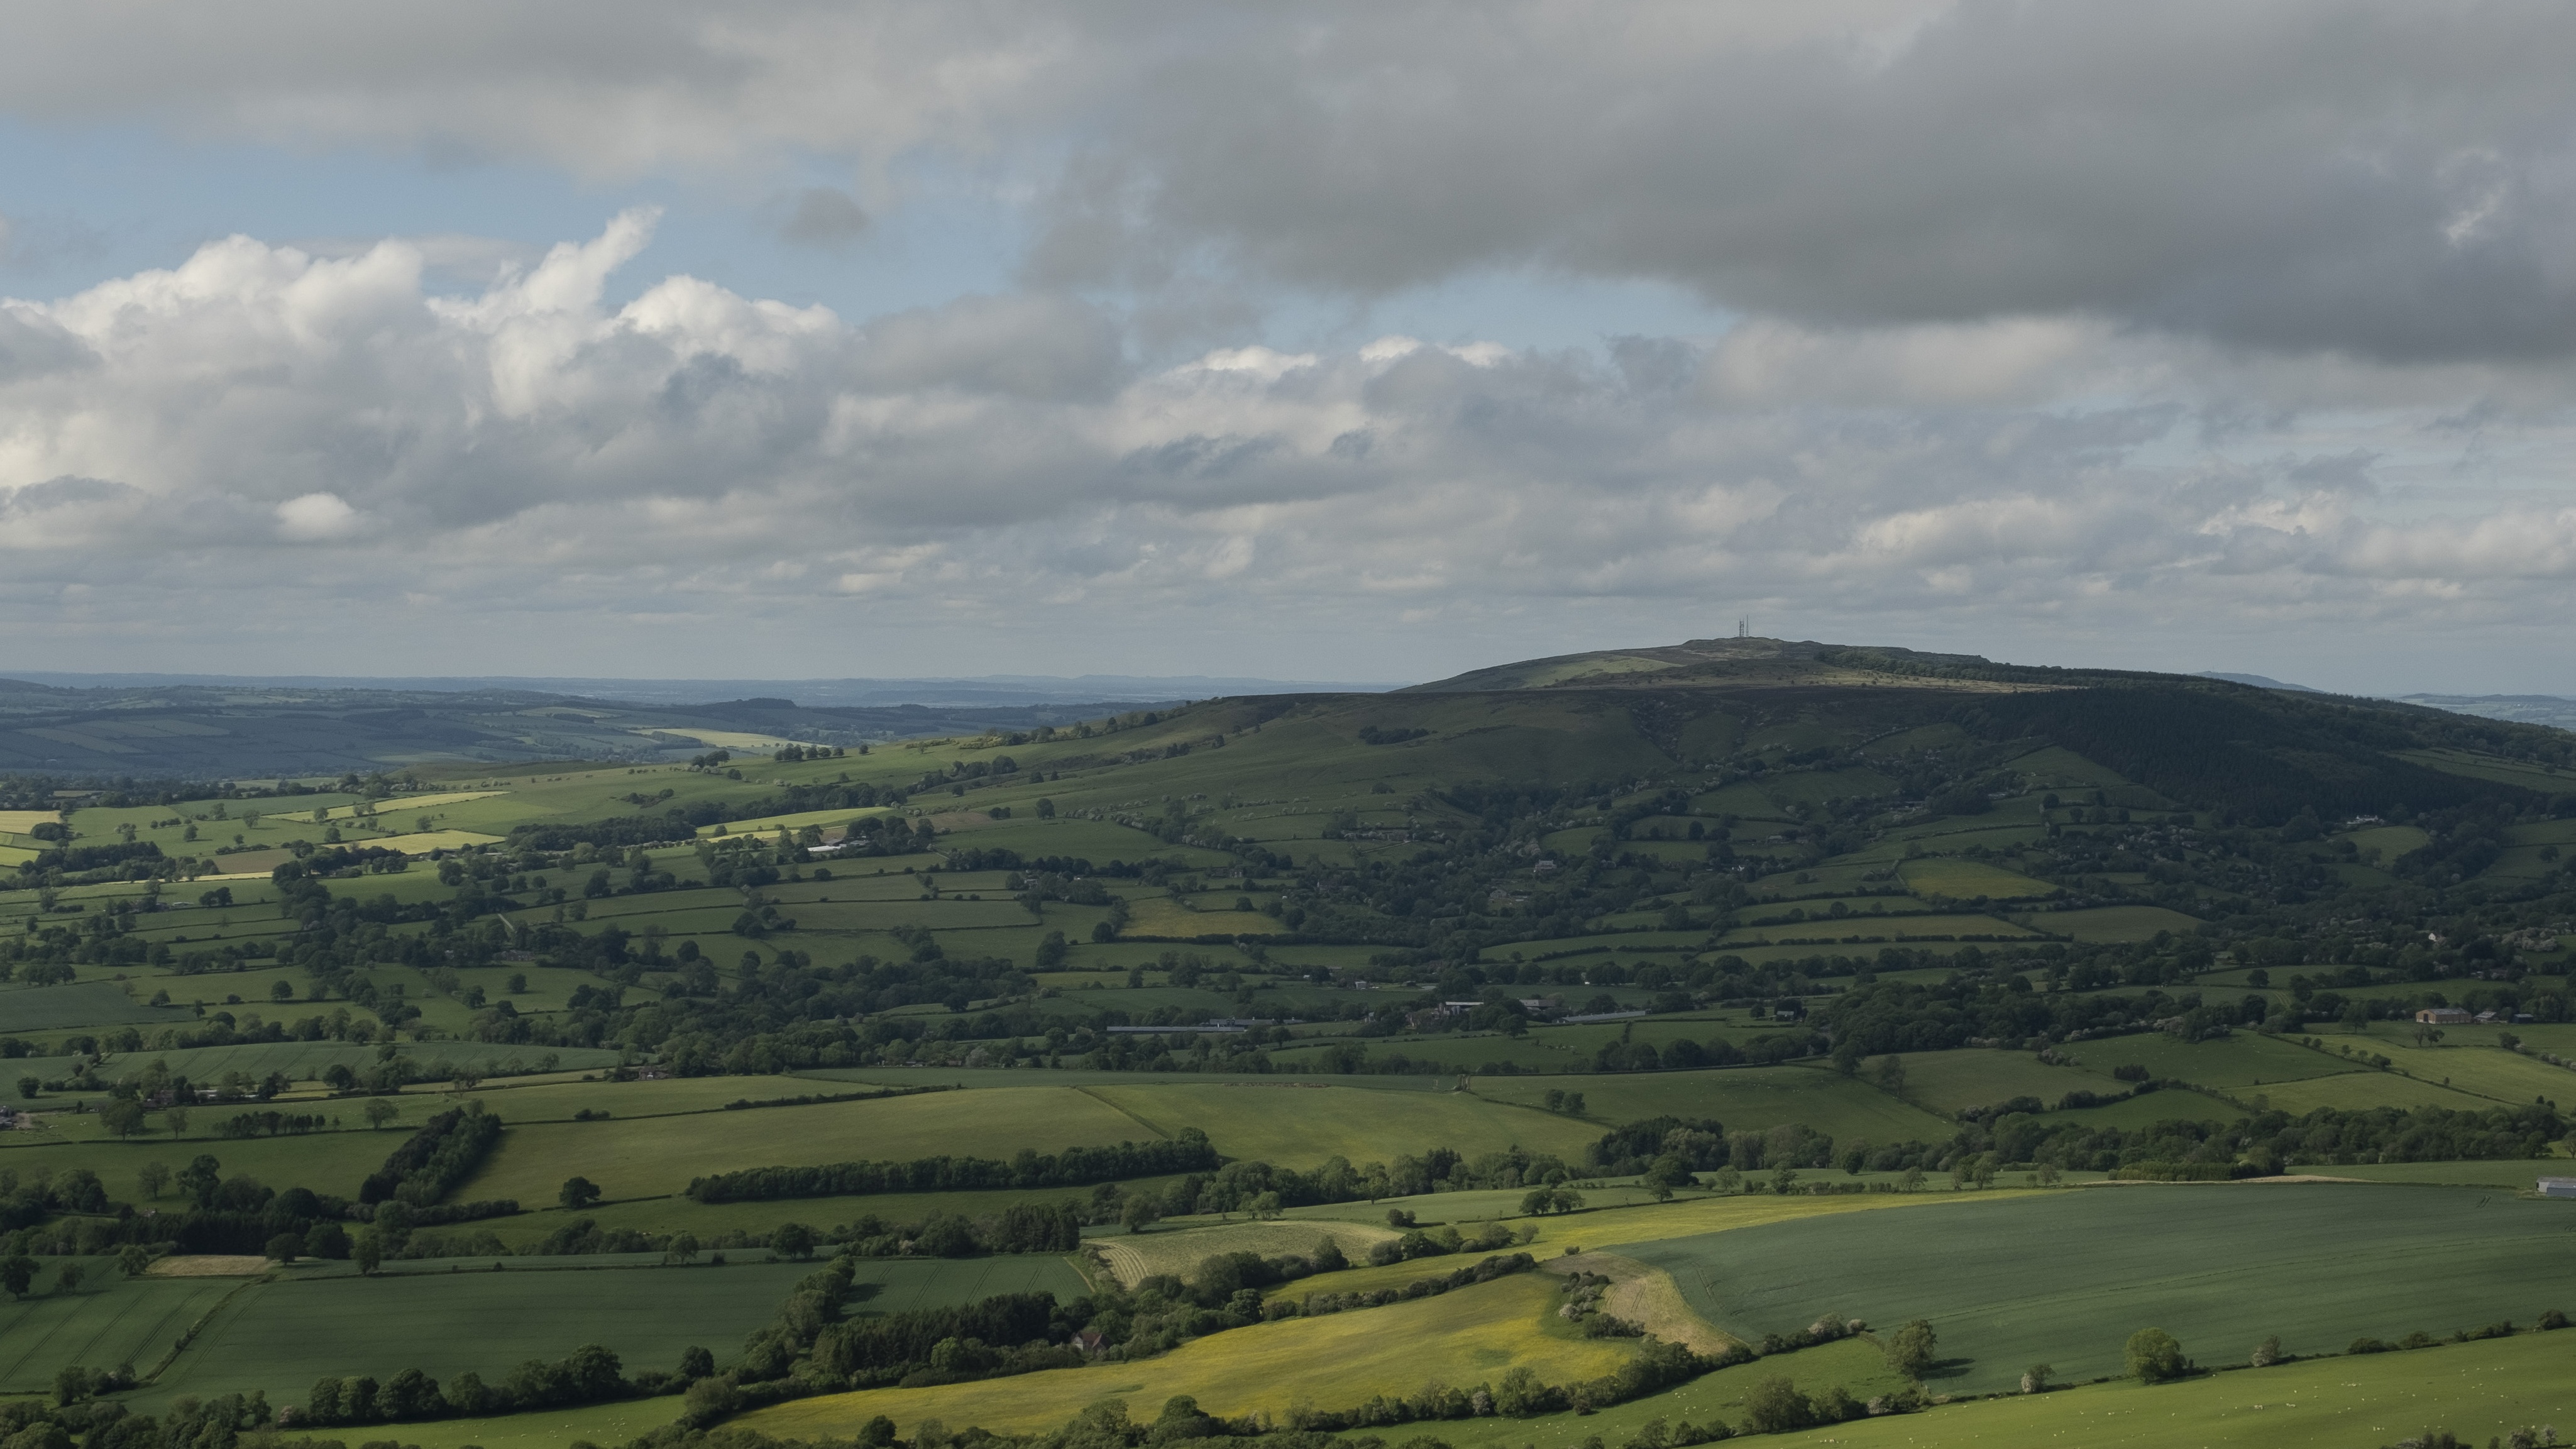 View from Titterstone Clee Hill